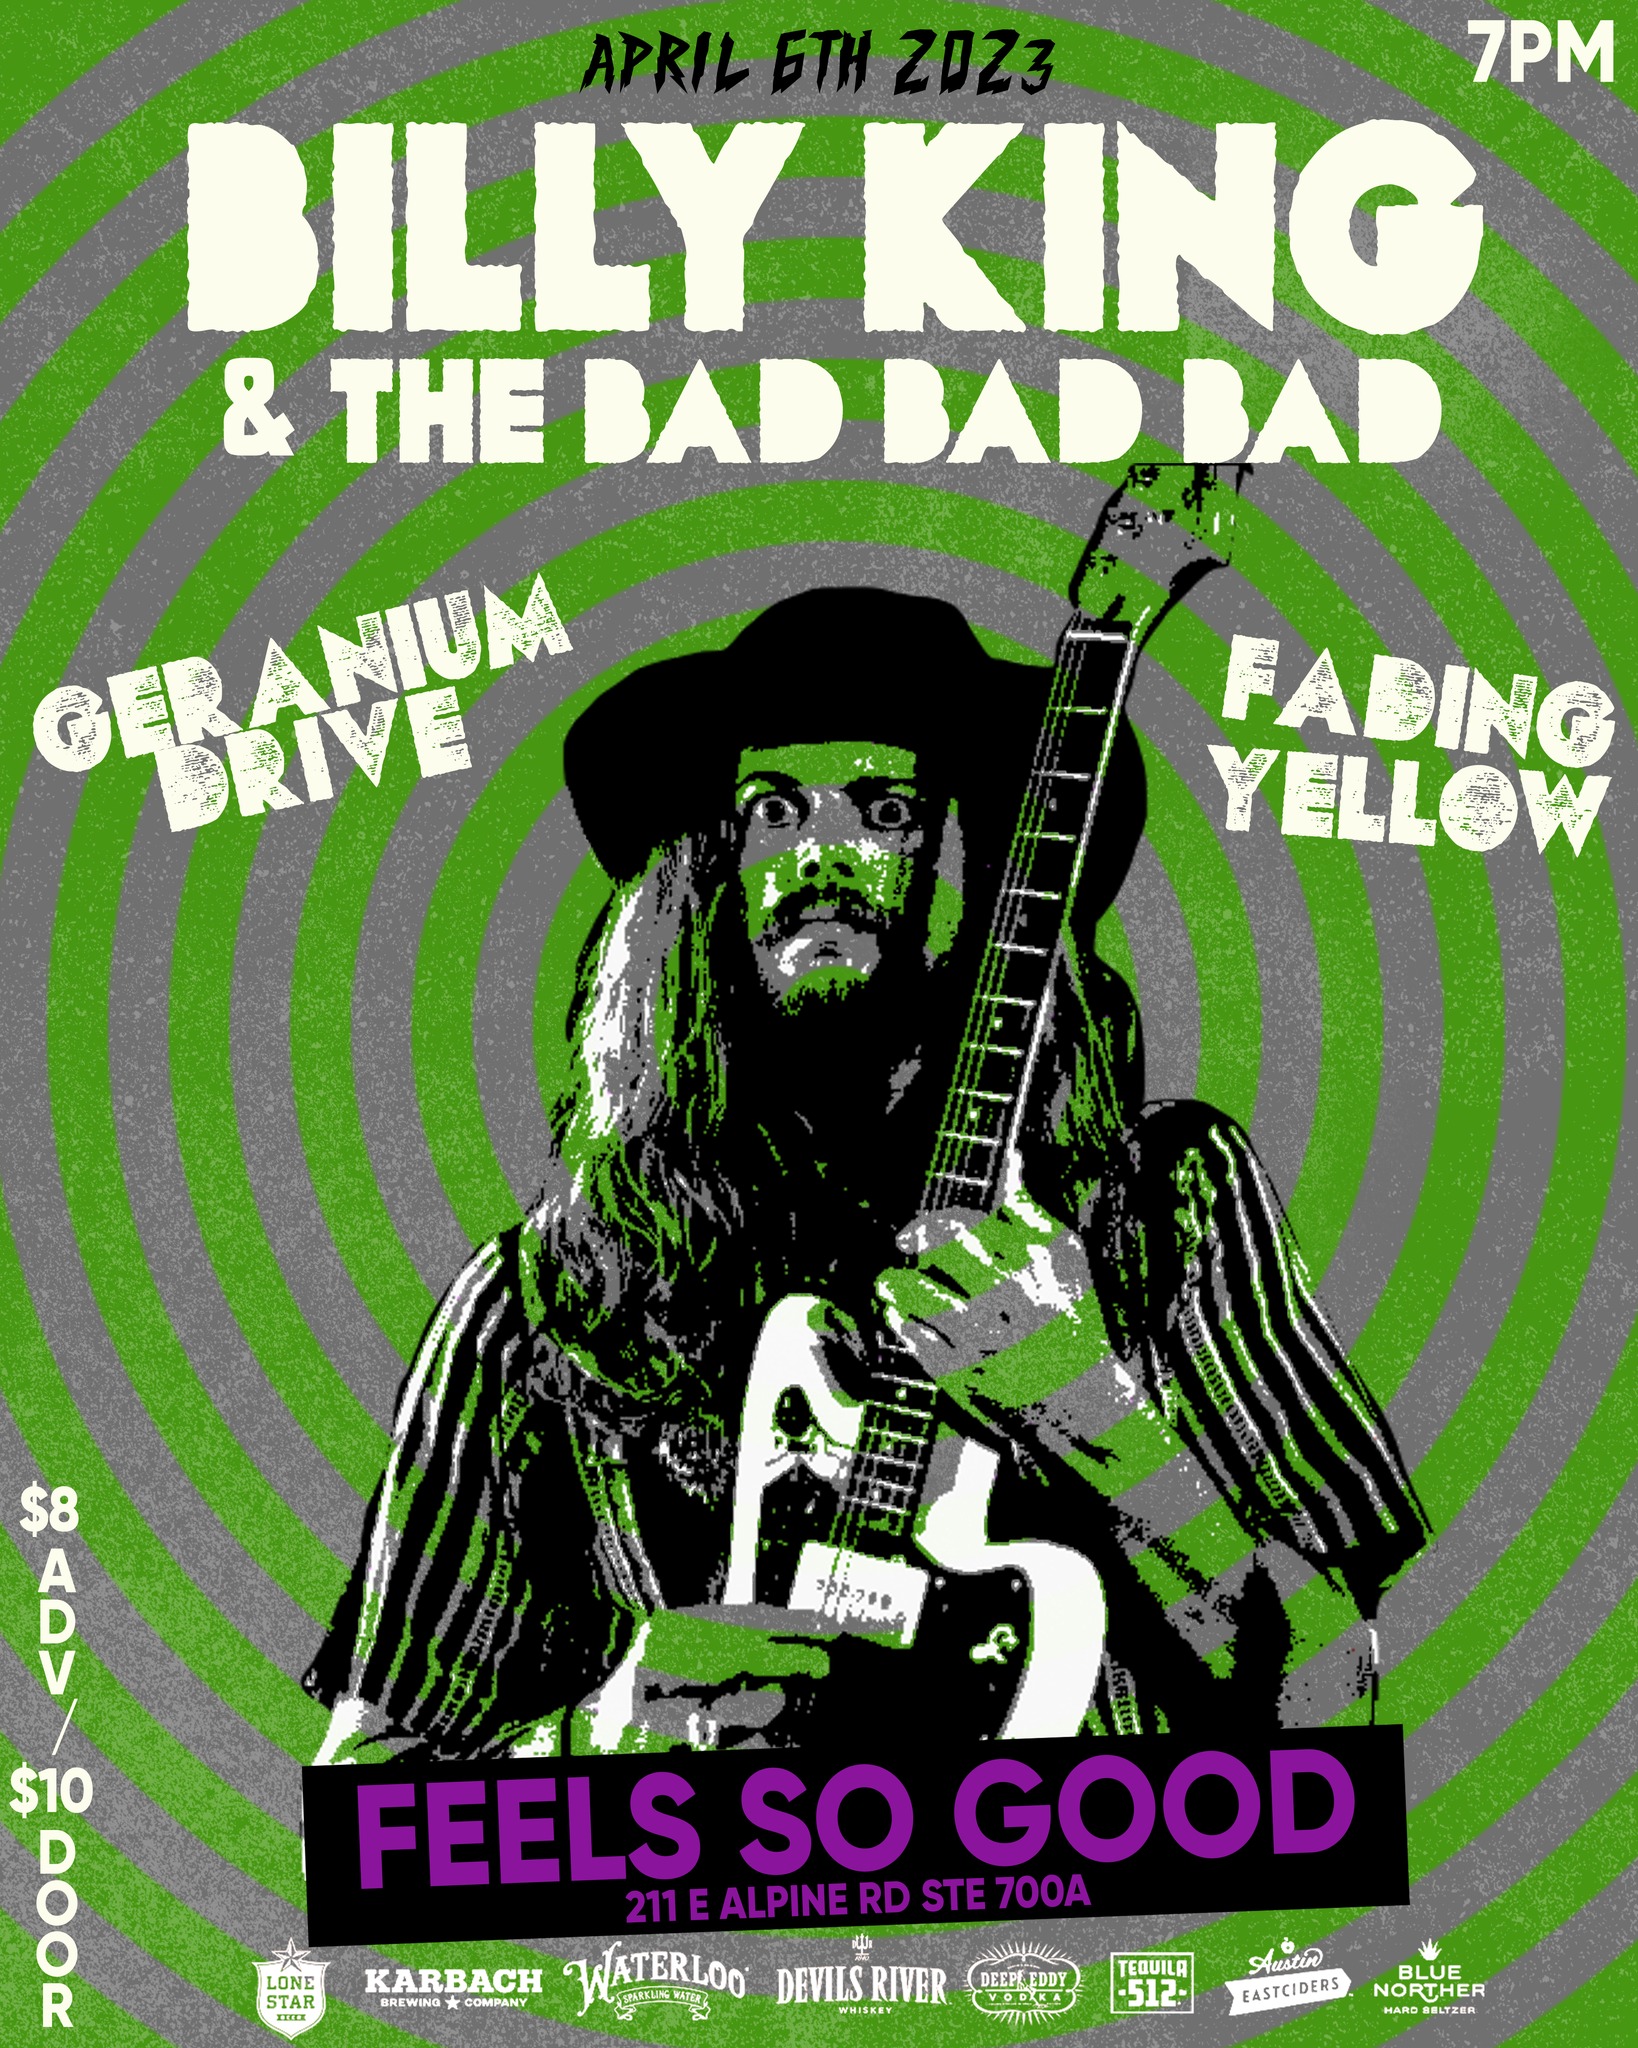 FSG Sessions: Billy King and the Bad, Bad, Bad, Geranium Drive, Fading Yell